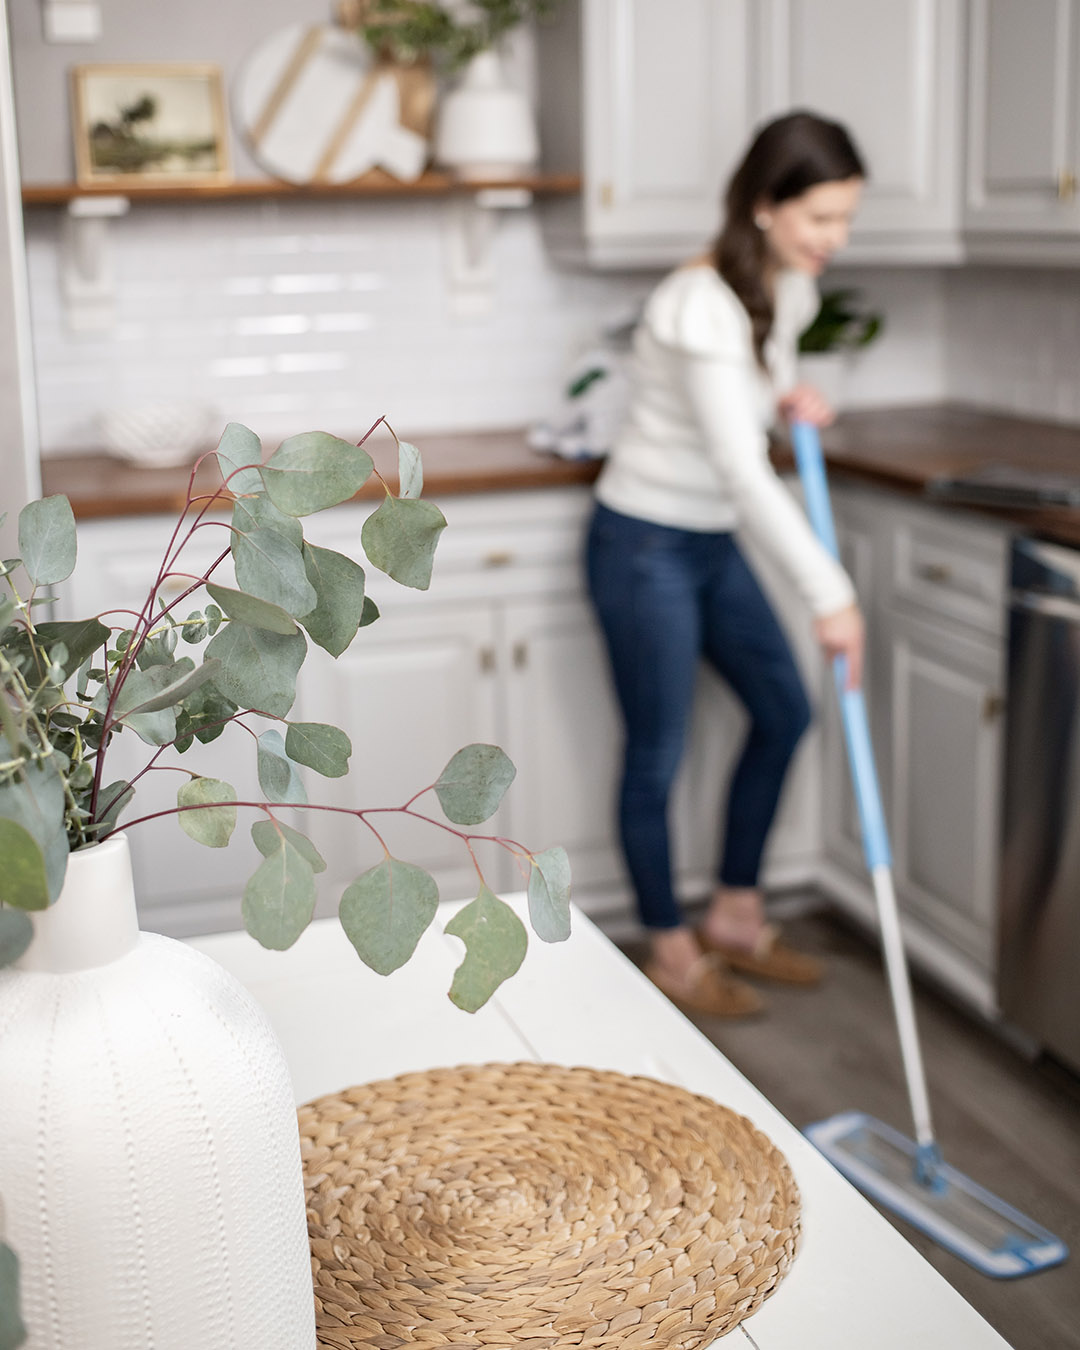 Today I'll be sharing my once-a-month kitchen cleaning routine for keeping my kitchen feeling like it's had a good deep clean without having to invest too much of my time into it.